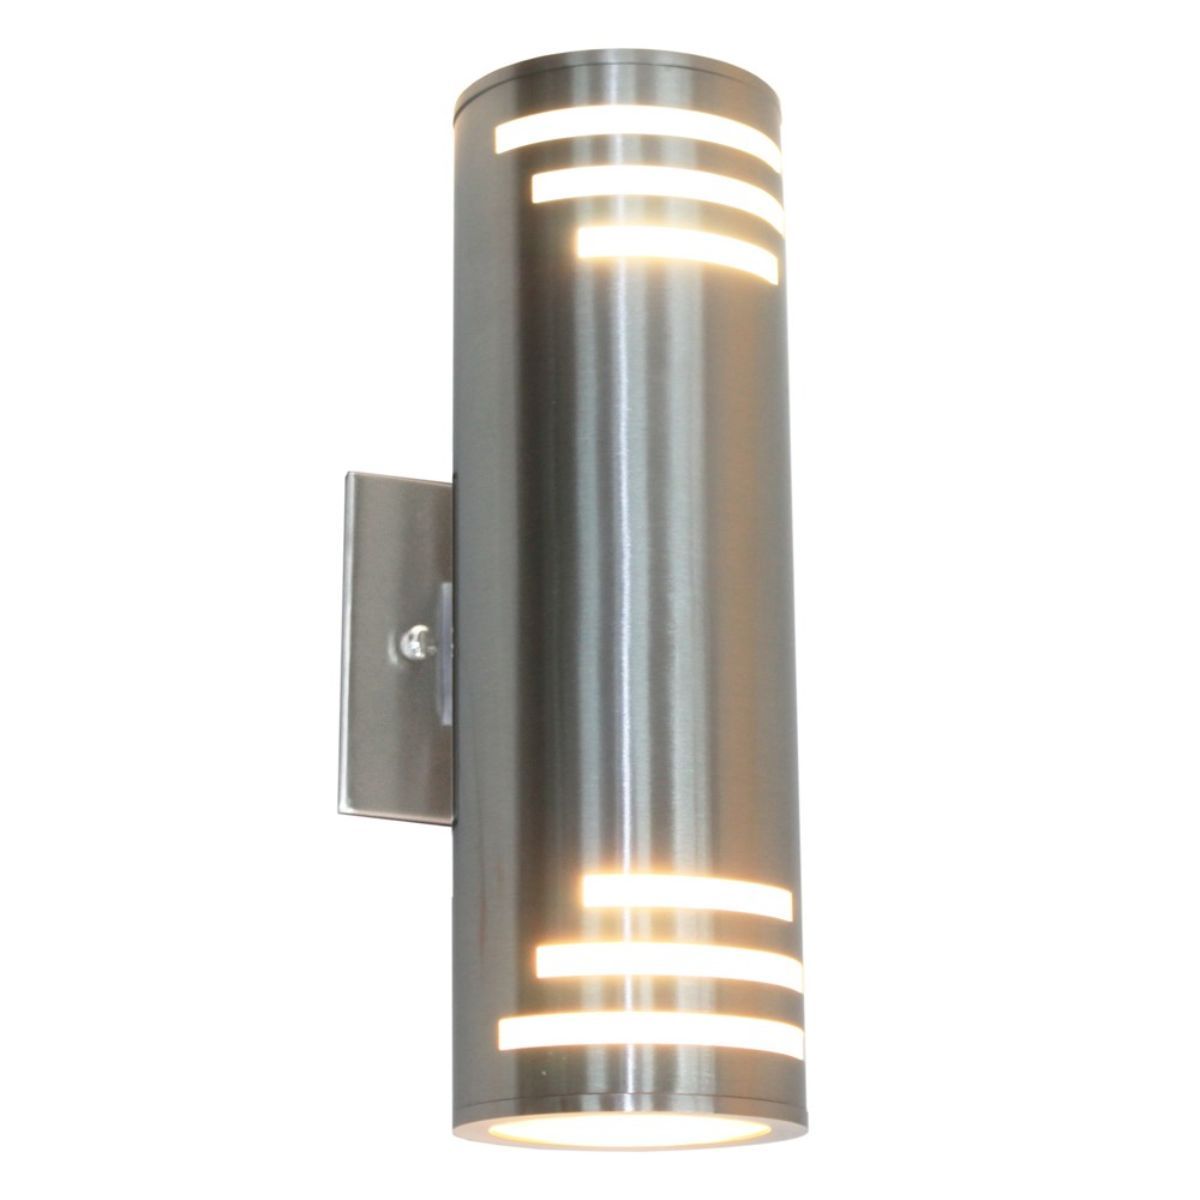 Nuevo 13 in. 2 Lights Outdoor Wall Sconce Stainless Steel Finish